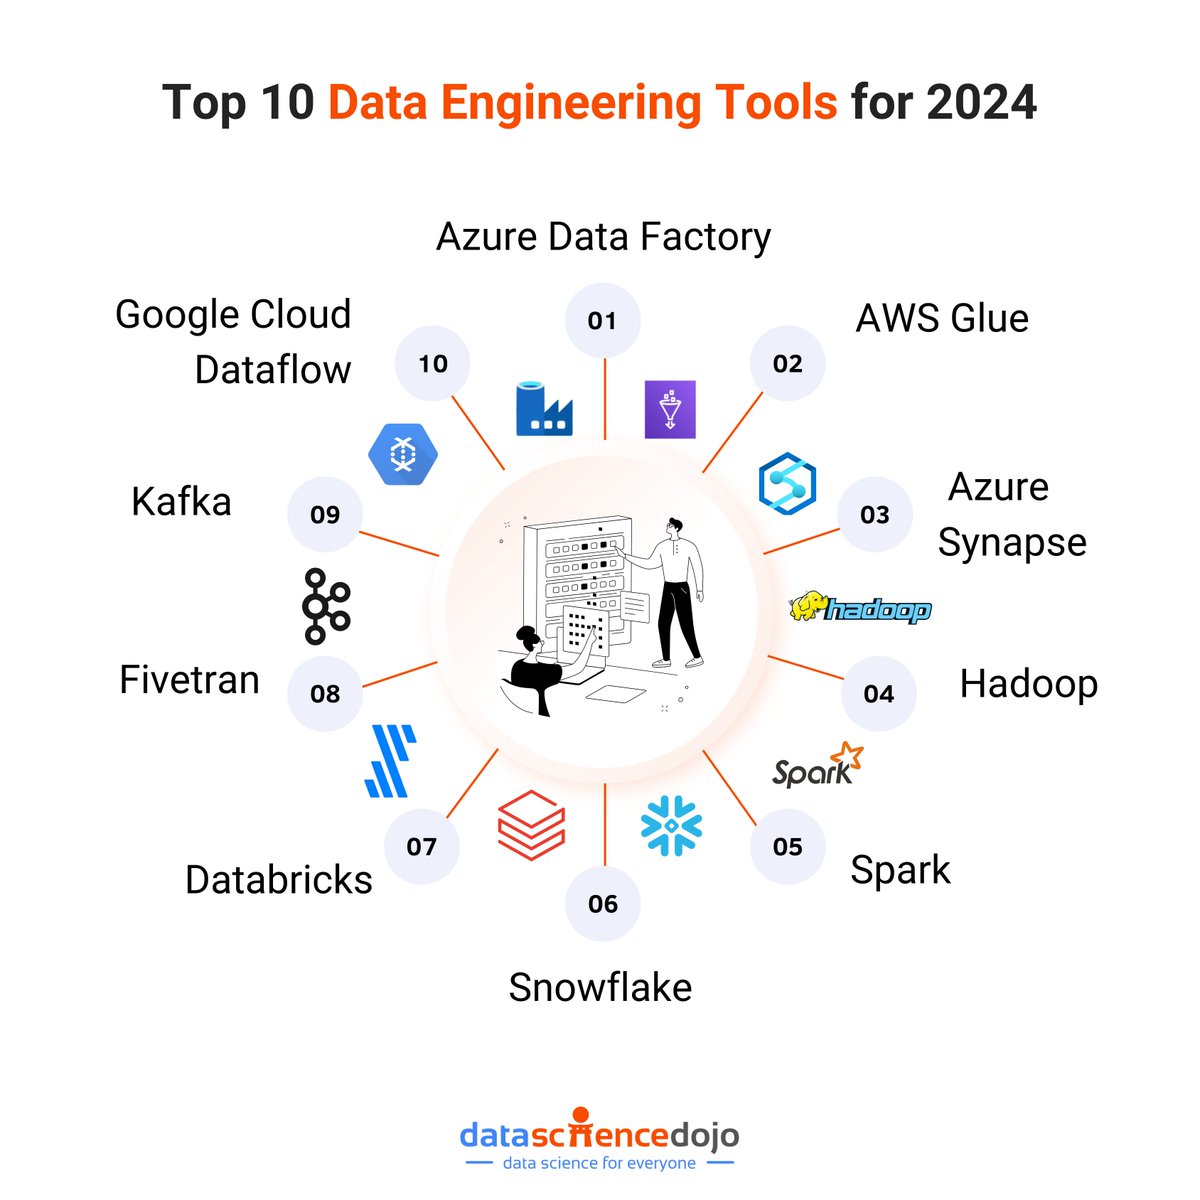 Data is like gold, but it's often raw and messy. Data engineers use amazing tools to transform it into sparkling insights.💥

Head over to the full blog post for the best data engineering tools of 2024! ➡️ hubs.la/Q02wR1TT0

#DataEngineeringTools #dataengineer #data